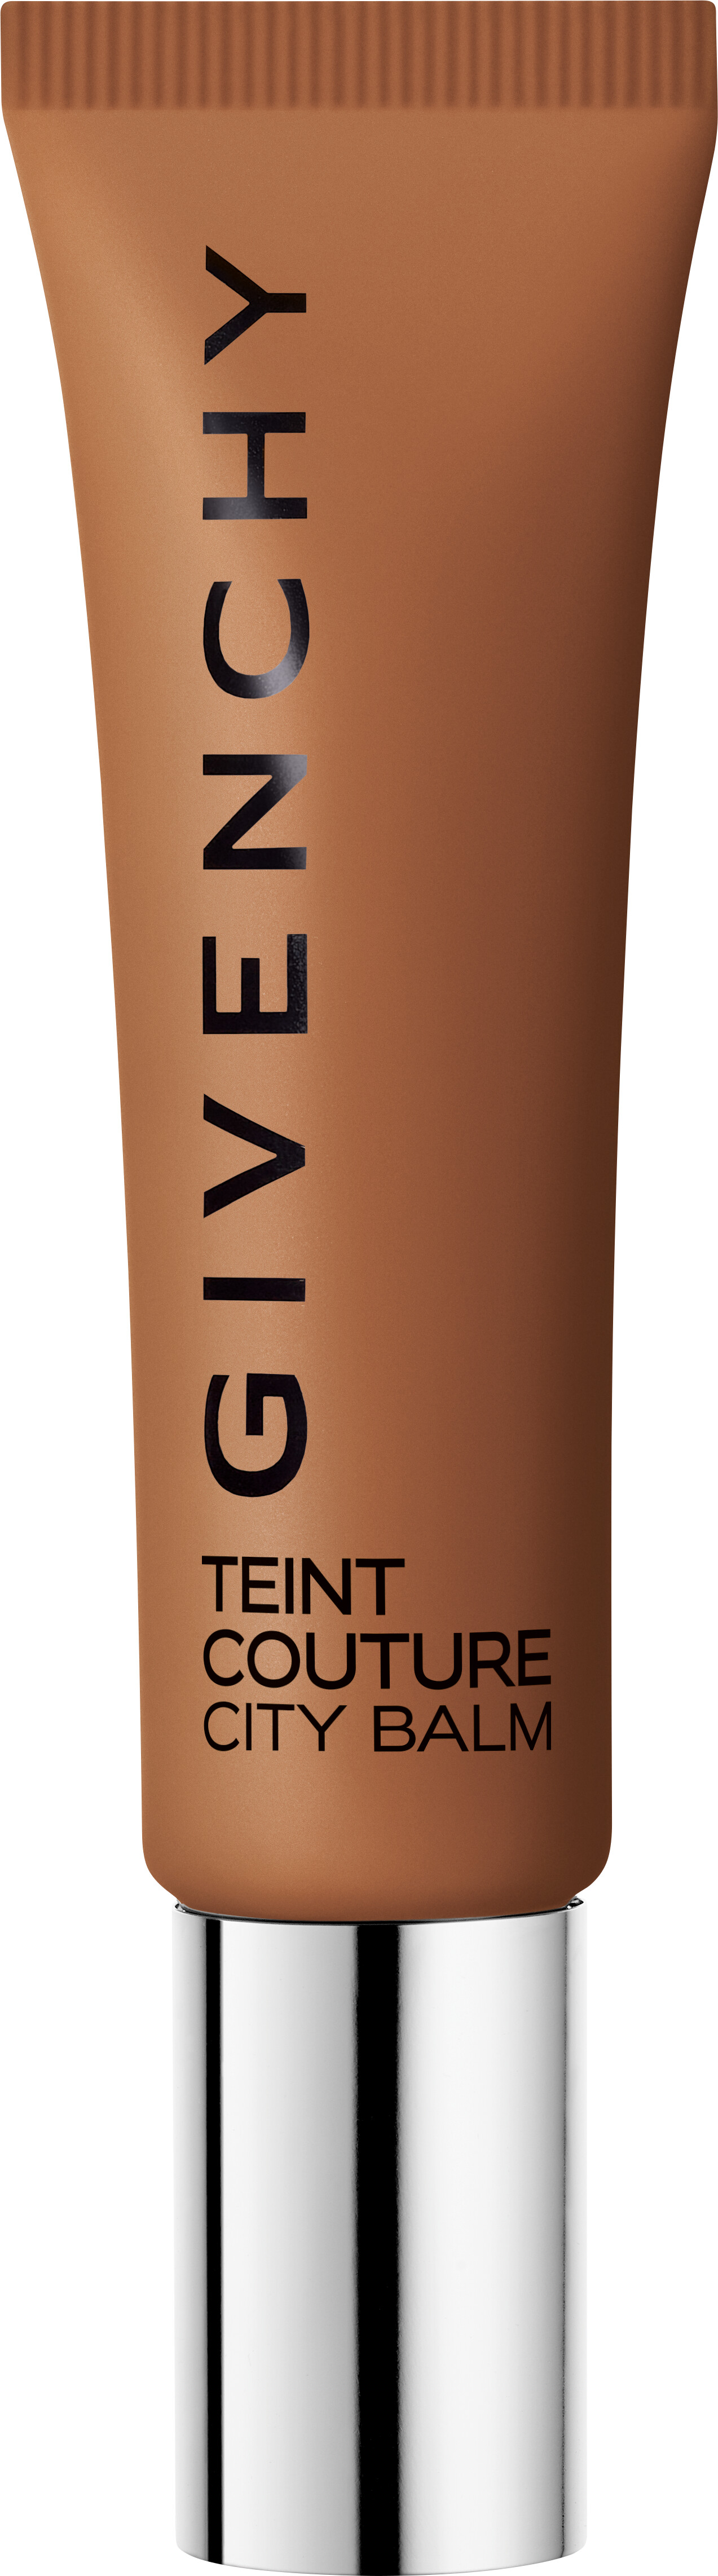 GIVENCHY Teint Couture City Balm SPF25 30ml N405